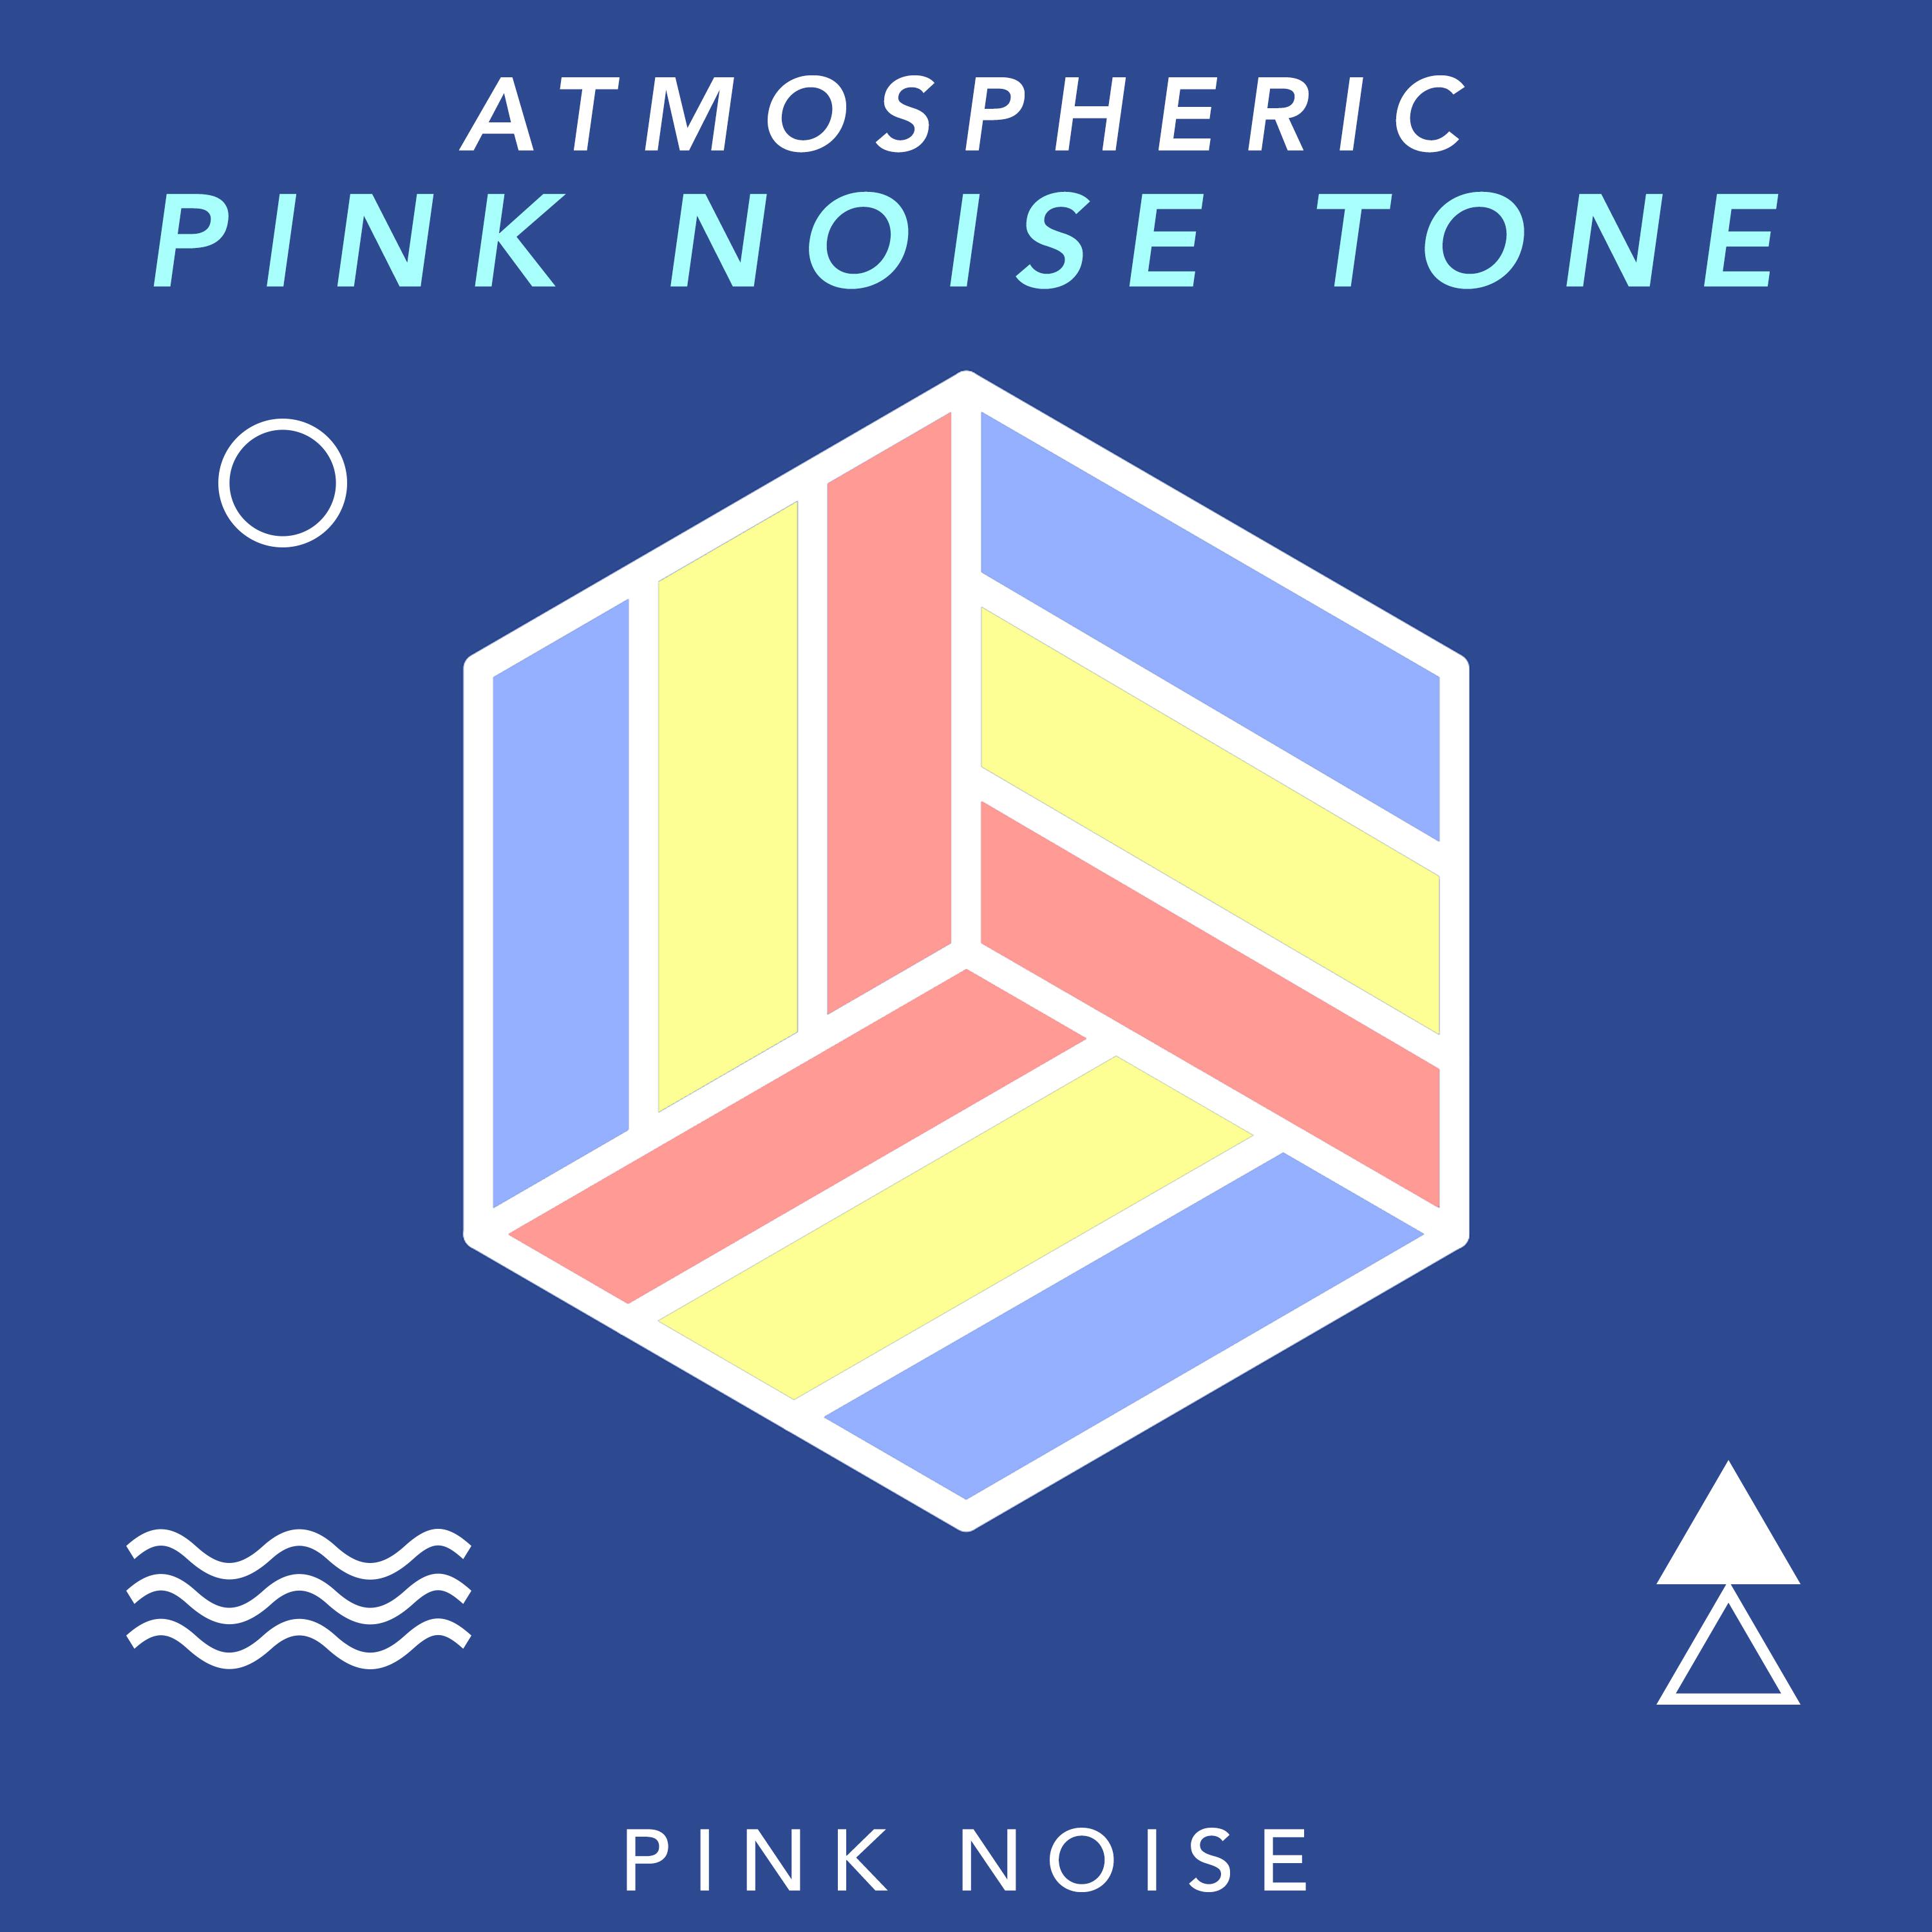 Atmospheric Pink Noise Tone